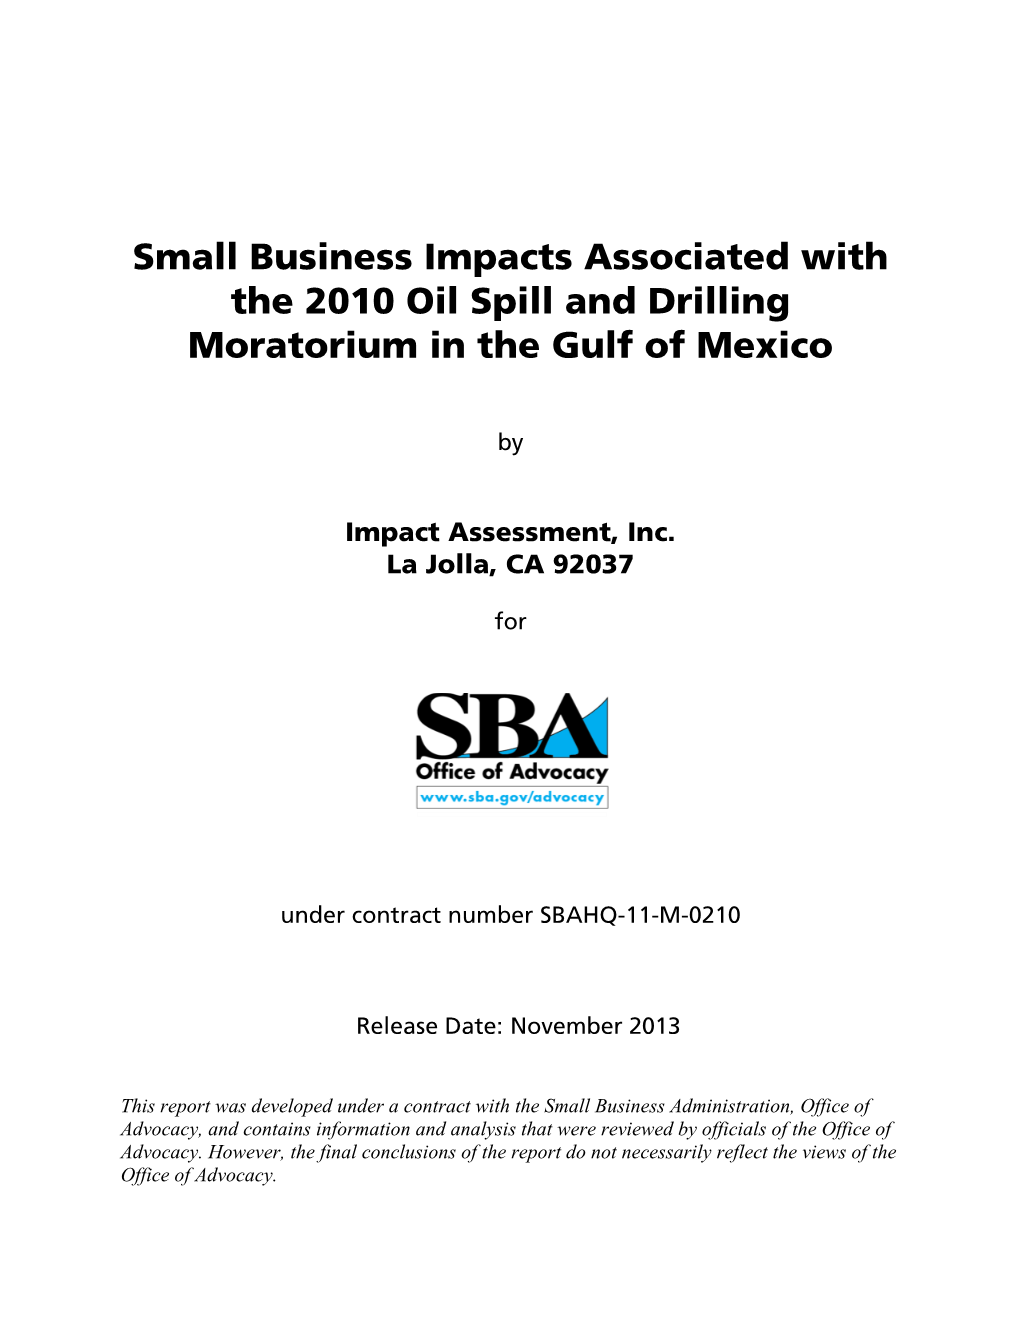 Small Business Impacts Associated with the 2010 Oil Spill and Drilling Moratorium in the Gulf of Mexico